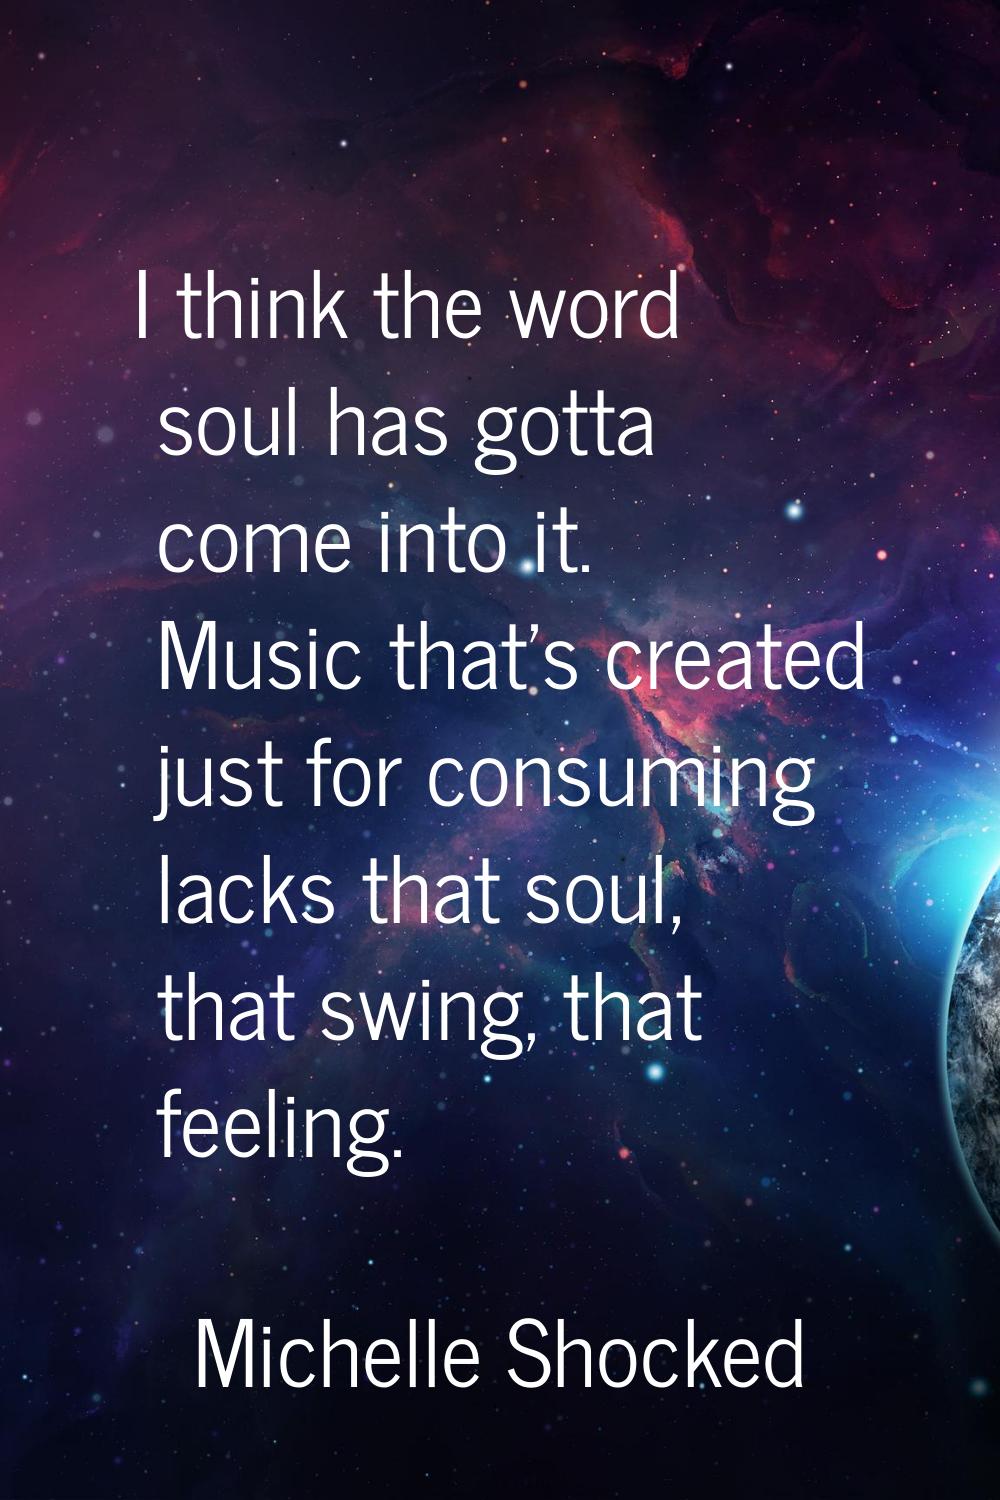 I think the word soul has gotta come into it. Music that's created just for consuming lacks that so